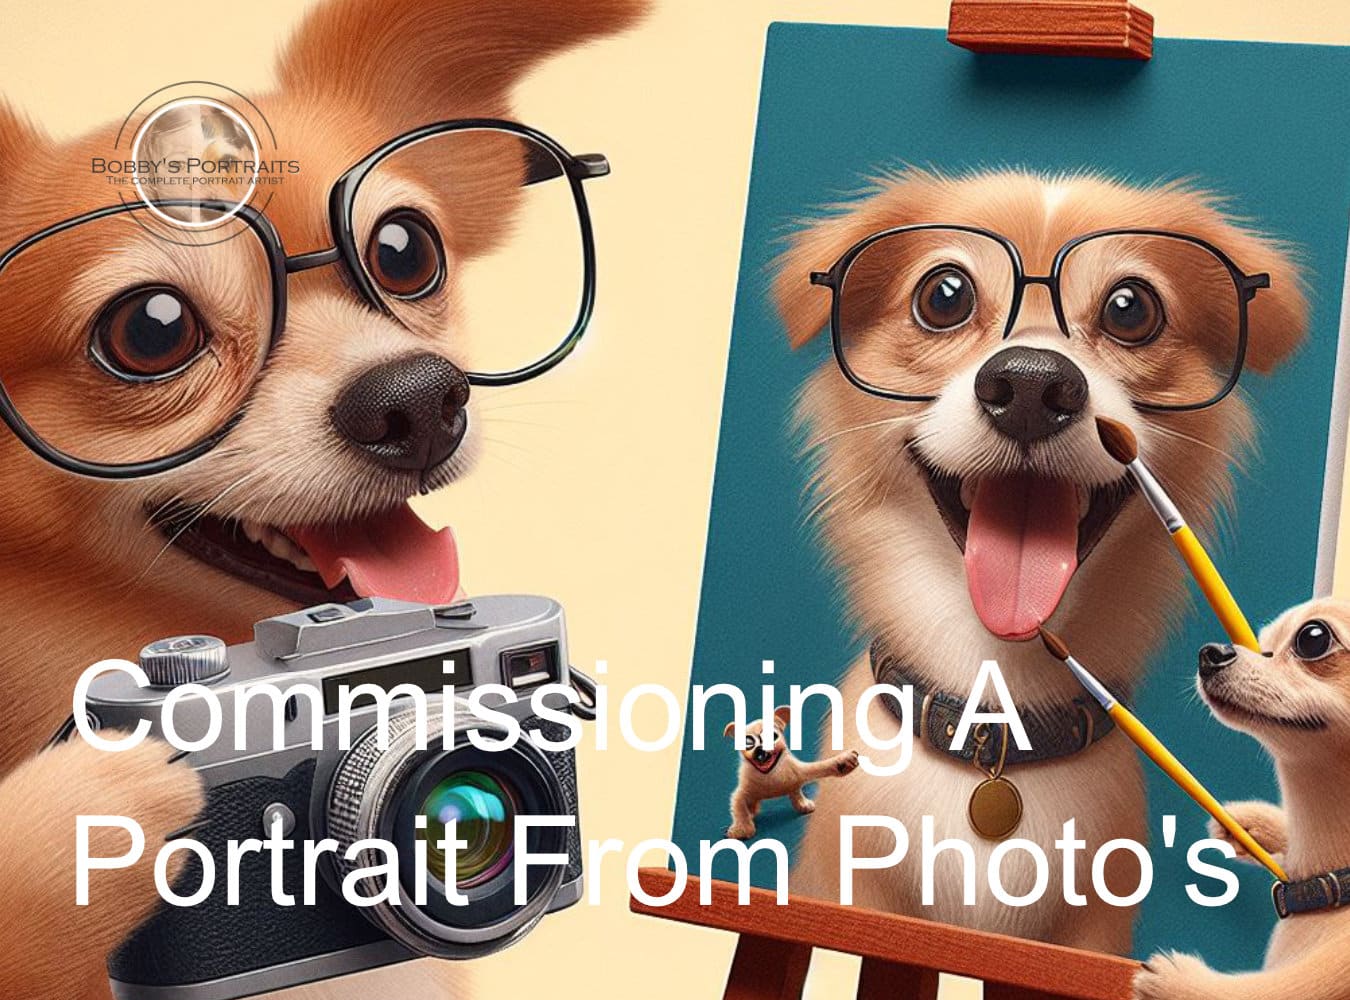 Featured image for “Commissioning a Portrait From Photos”